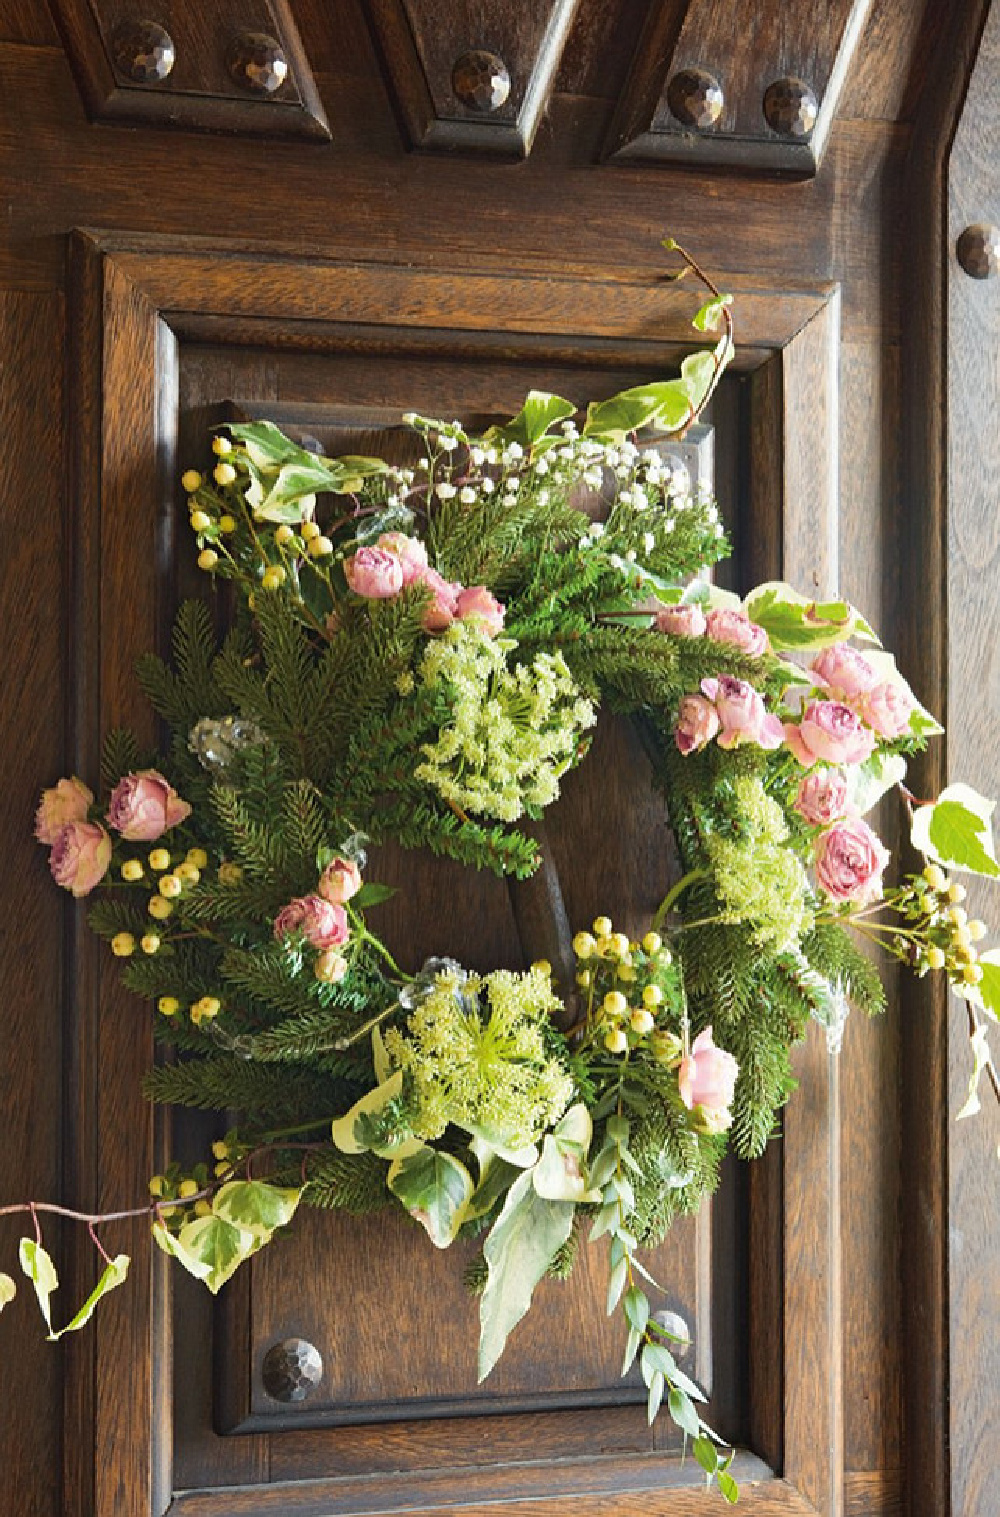 Charming holiday wreath on door with pink flowers. El Mueble magazine. #frenchcountrychristmas #pinkchristmas #countryfrenchdecor #christmaswreath